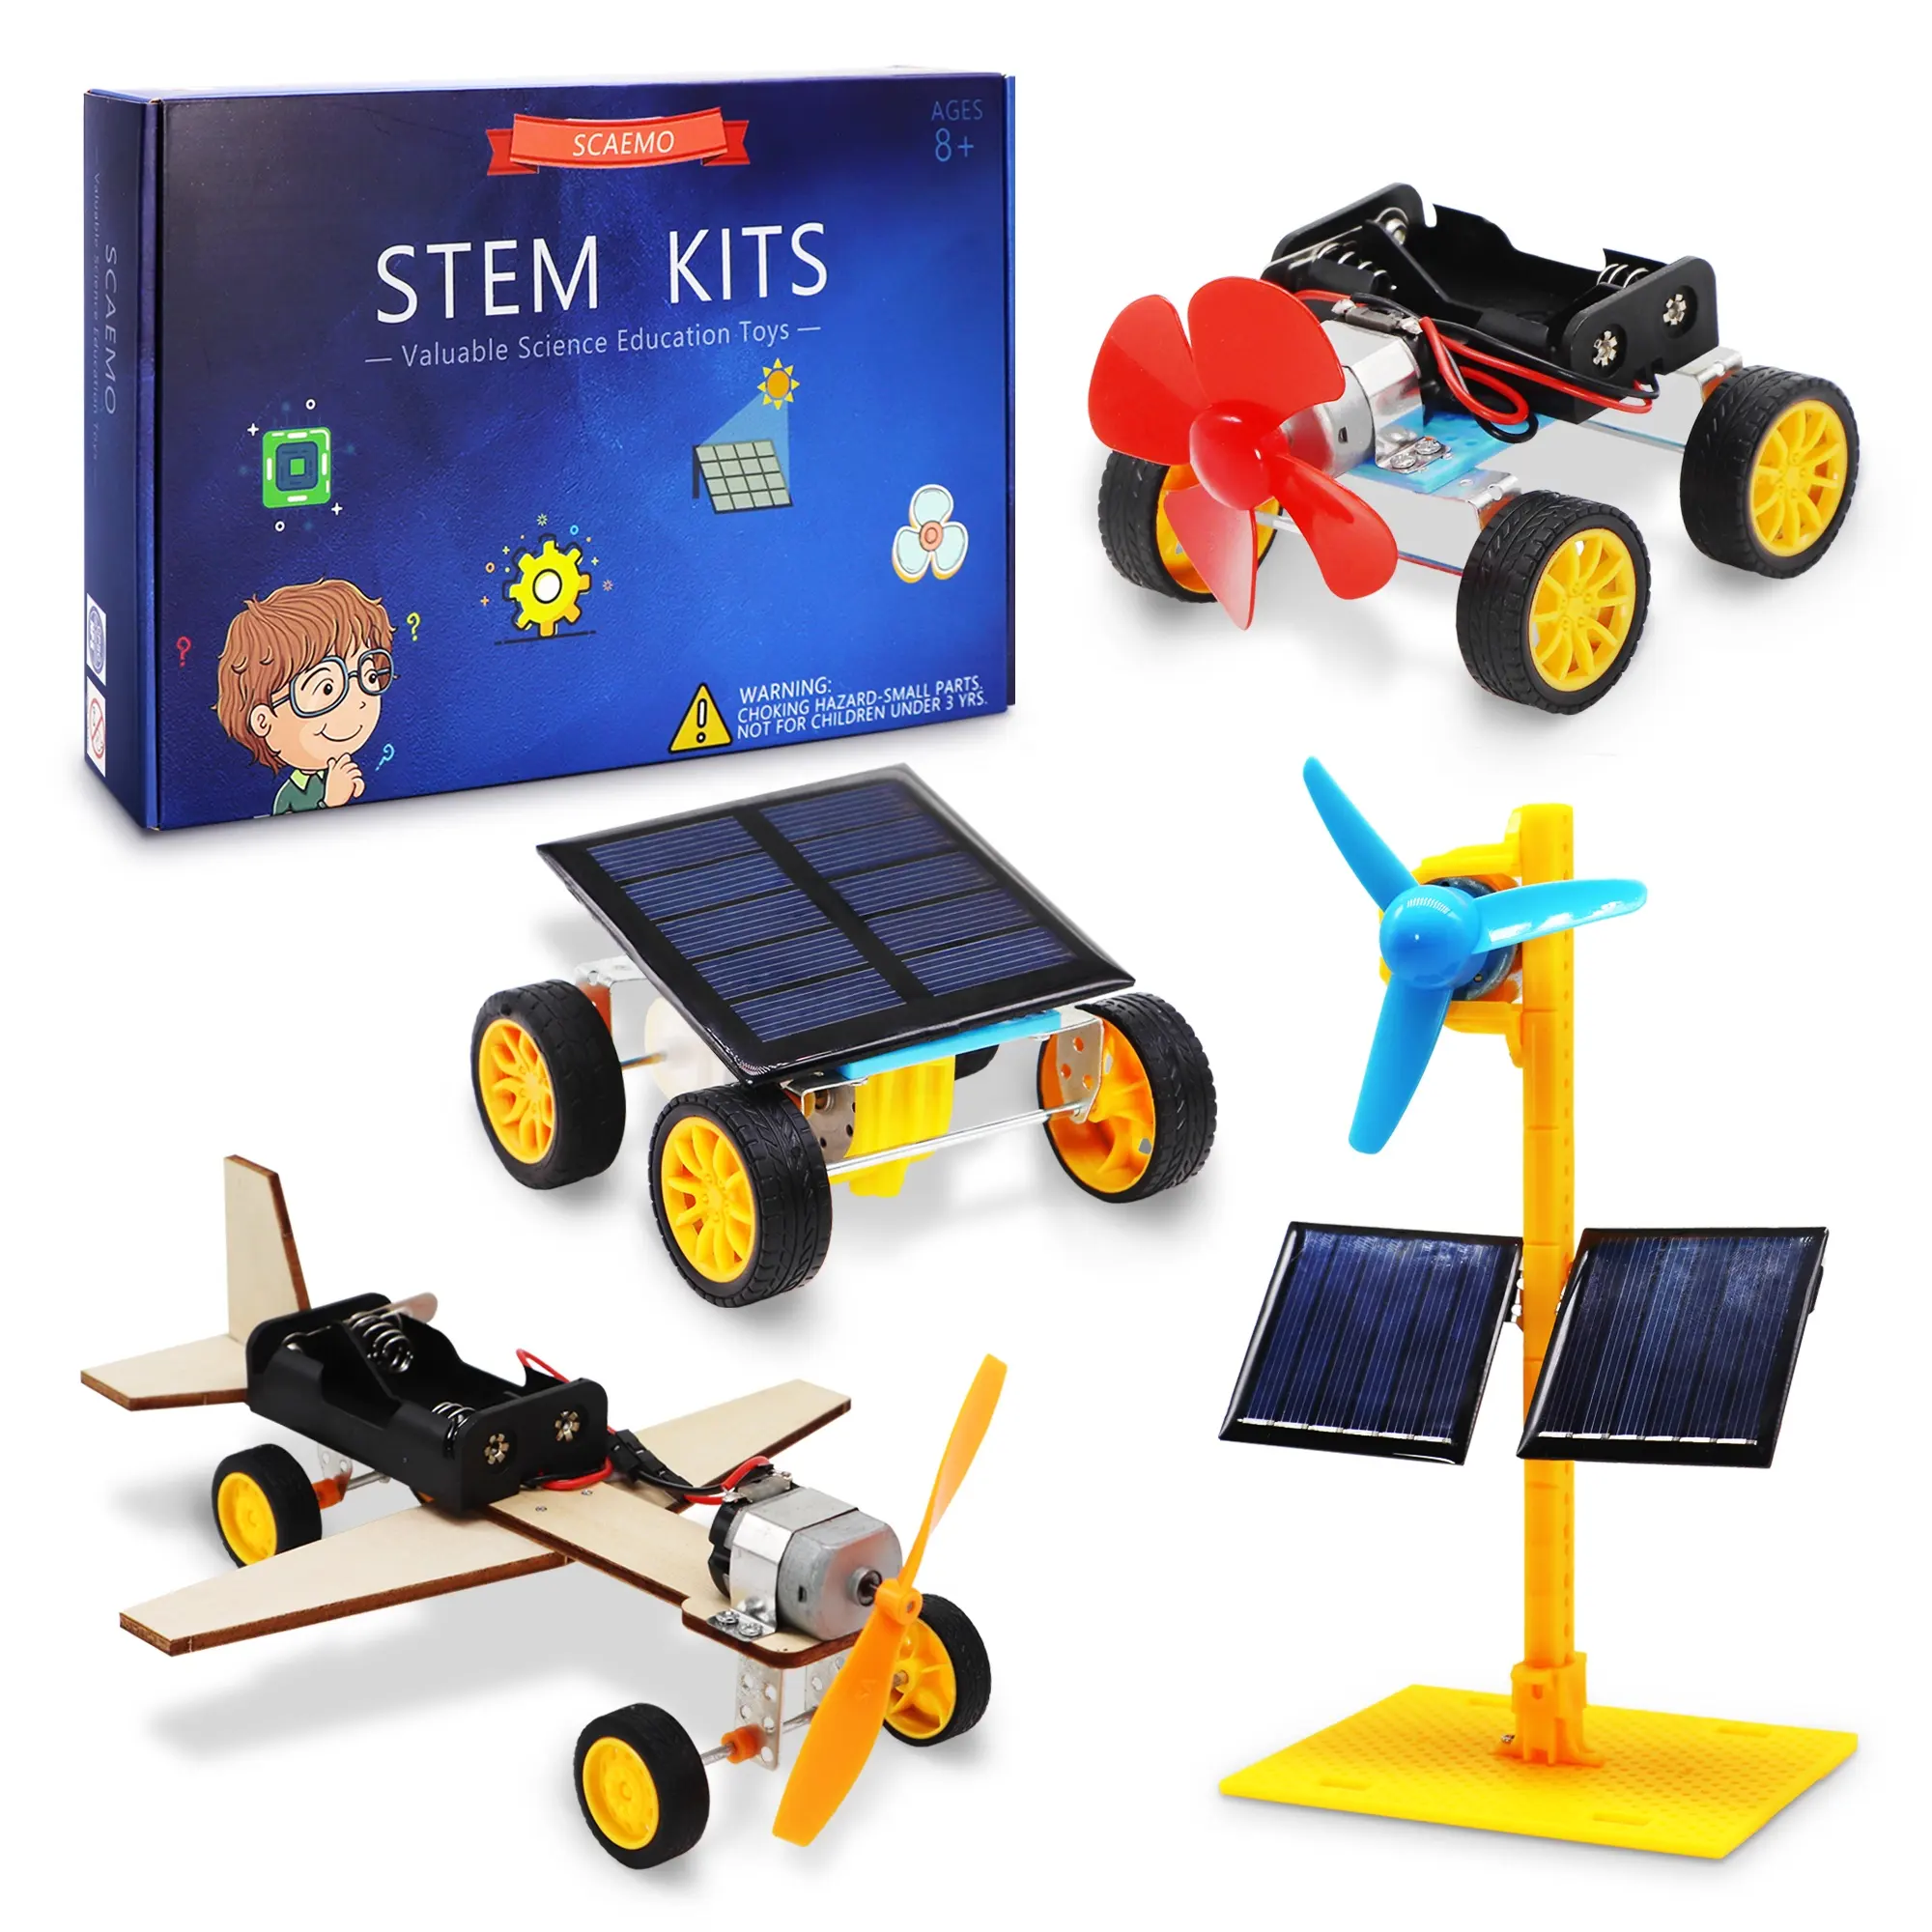 CYOEST 4 sets in 1 Electric Science Experiment Projects,Educational Building Car Kit for Kids,DIY STEM Solar Motor Toys